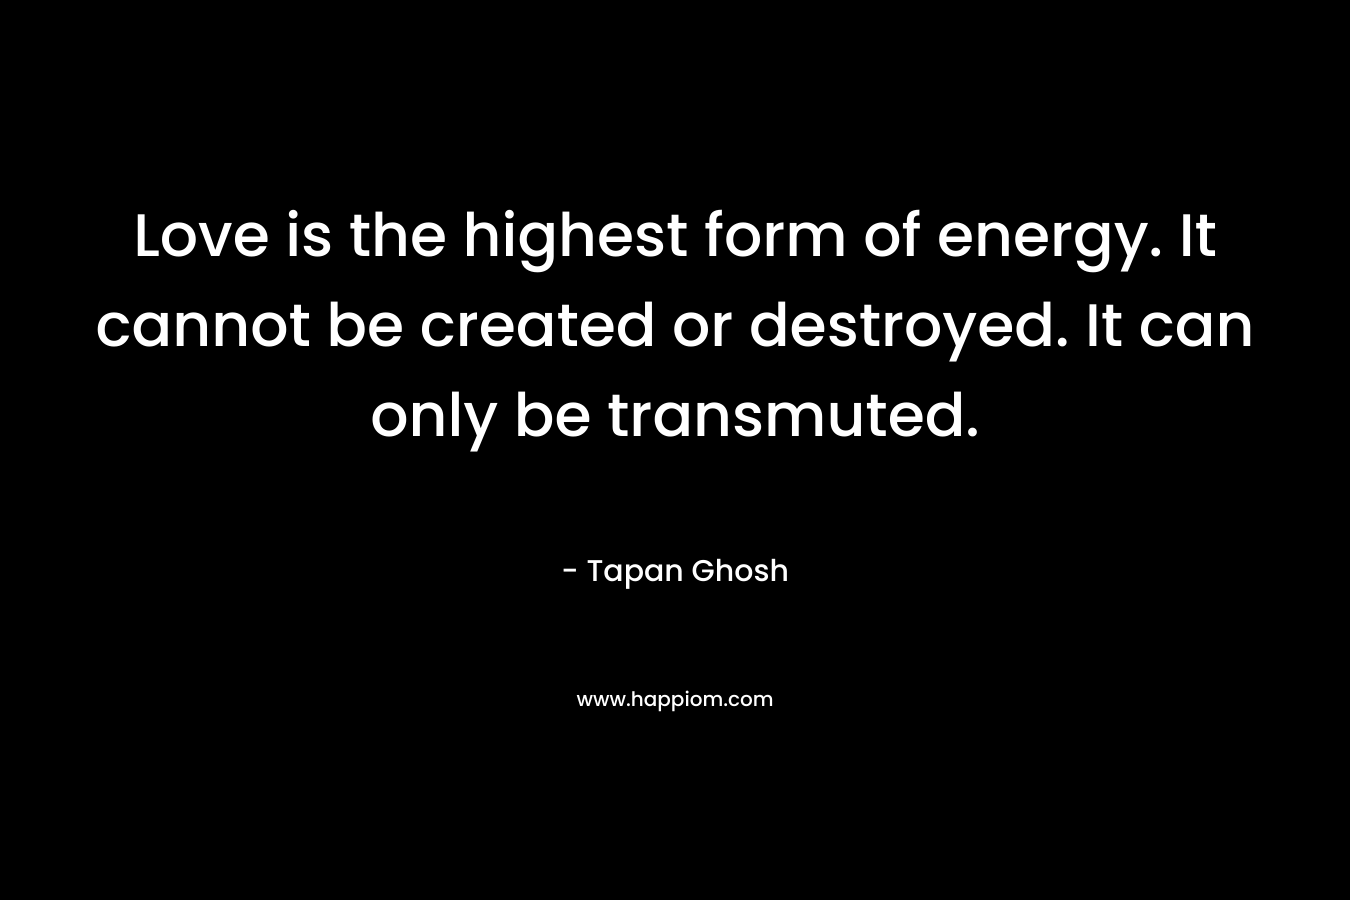 Love is the highest form of energy. It cannot be created or destroyed. It can only be transmuted.